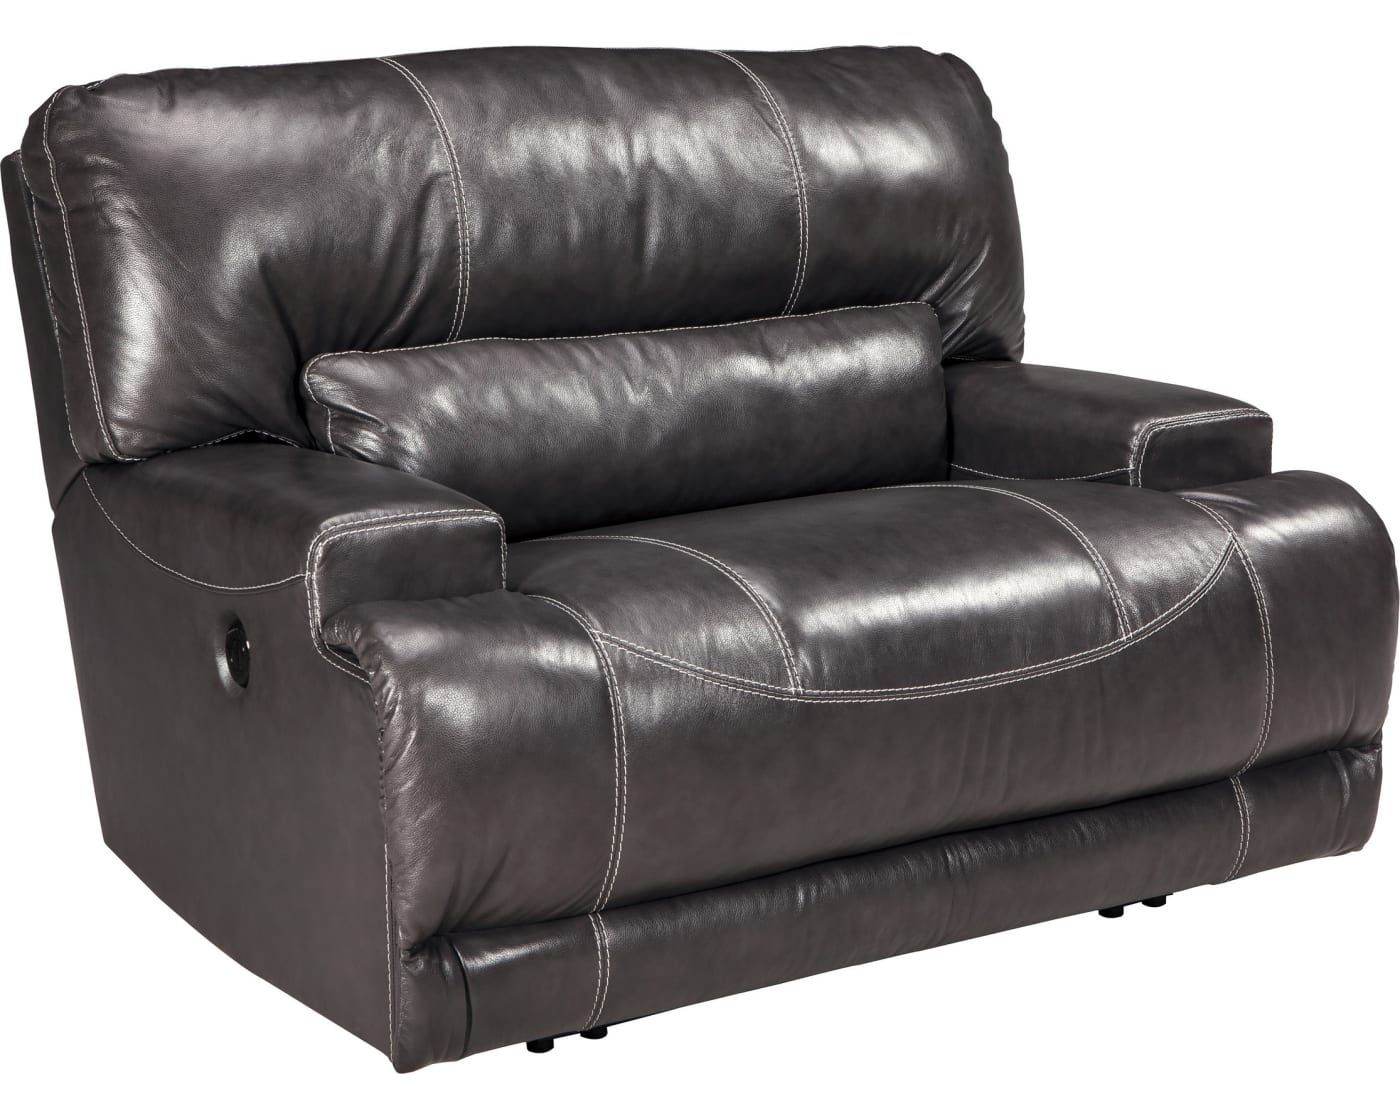 Signature Designashley Mccaskill Gray Wide Seat Power In Walker Gray Power Reclining Sofas (View 1 of 15)